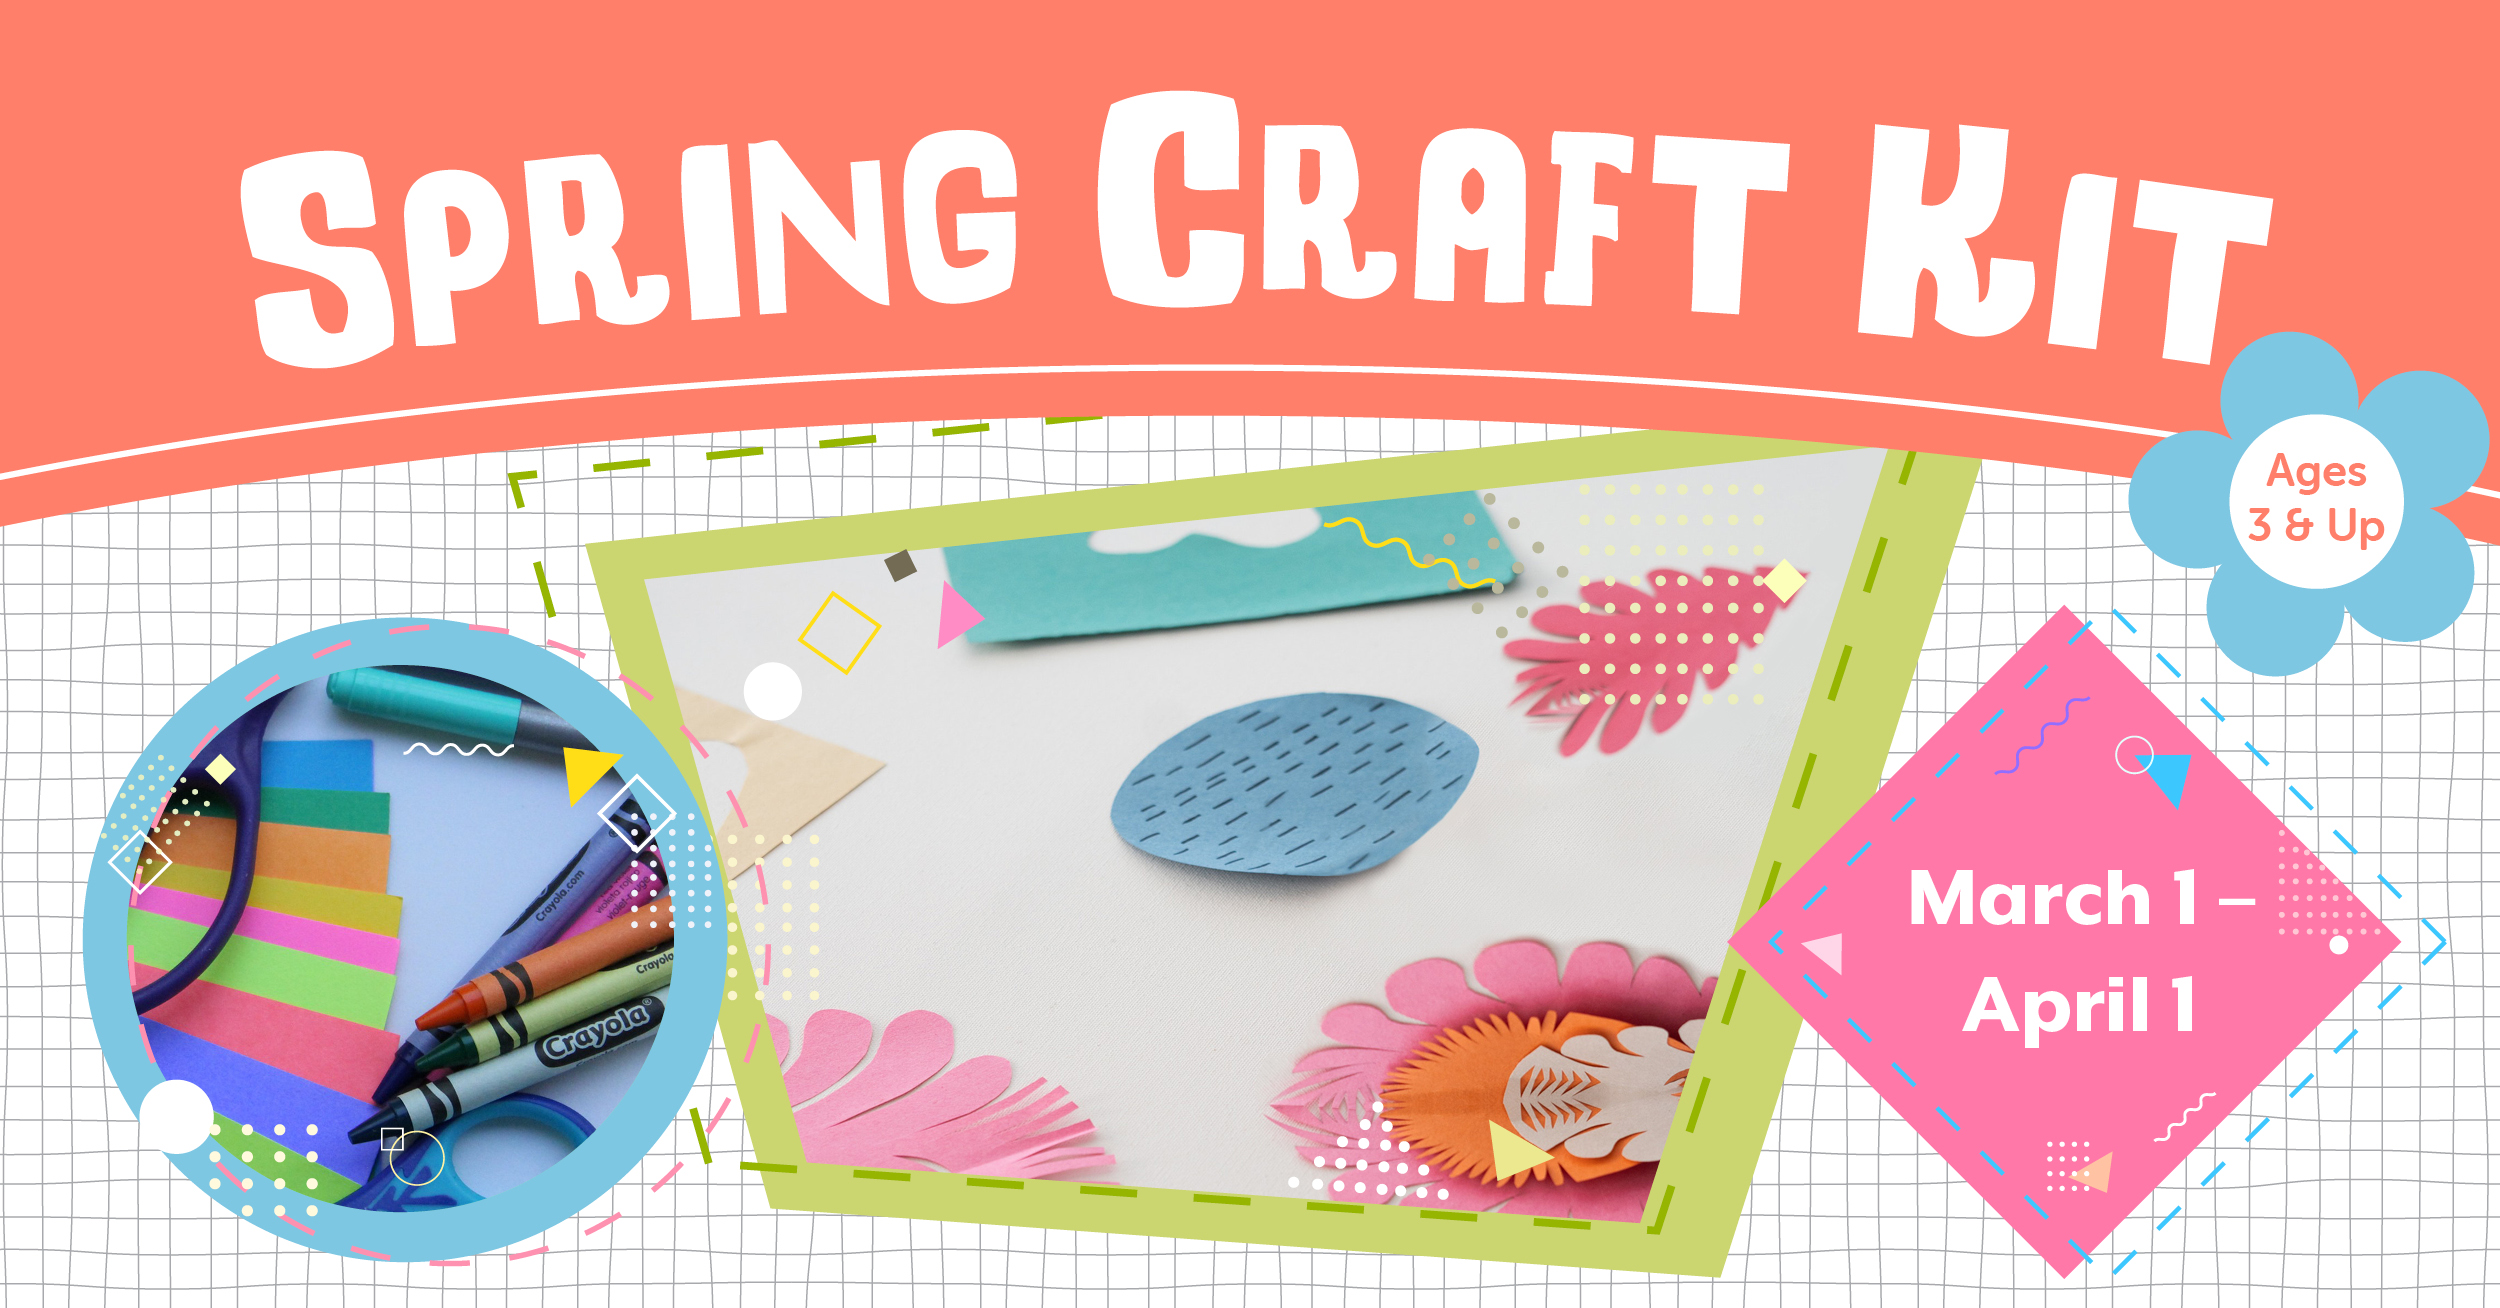 Spring Craft Kit. ages 3 and up. March 1 to April 1. 